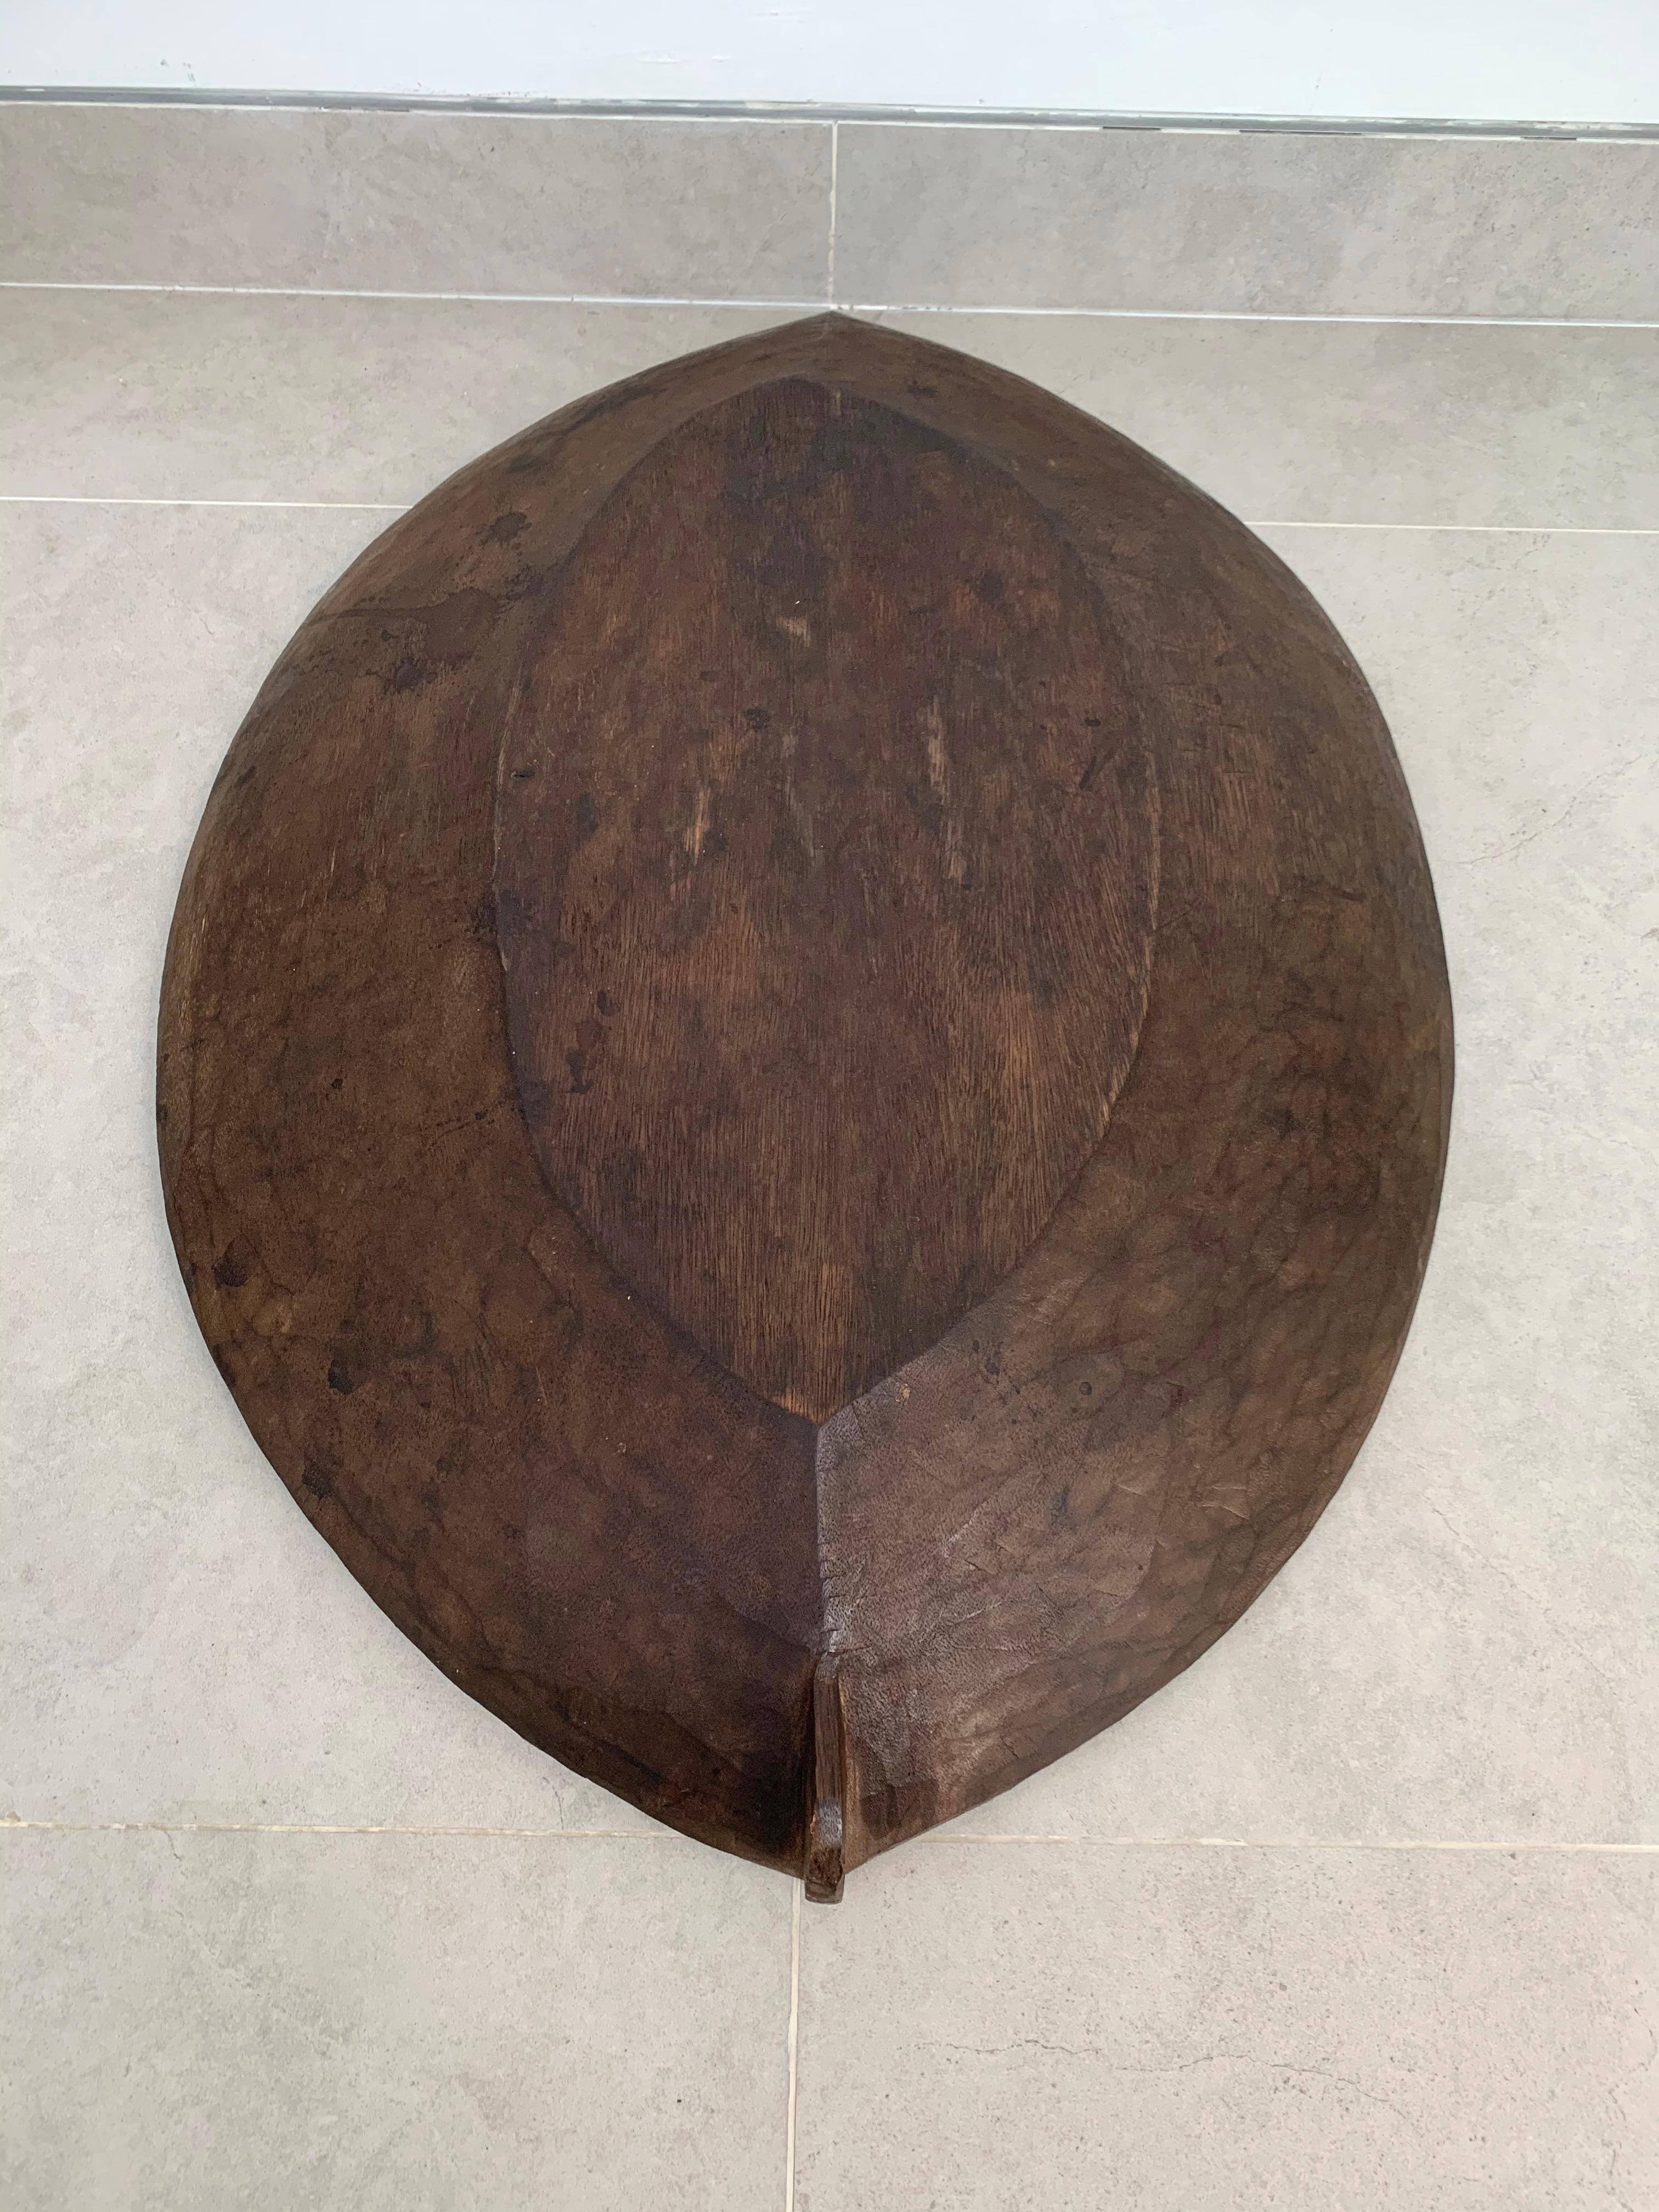 Hand-Carved Wooden Tray / Bowl Mentawai Tribe of Indonesia, Mid-20th Century  For Sale 2